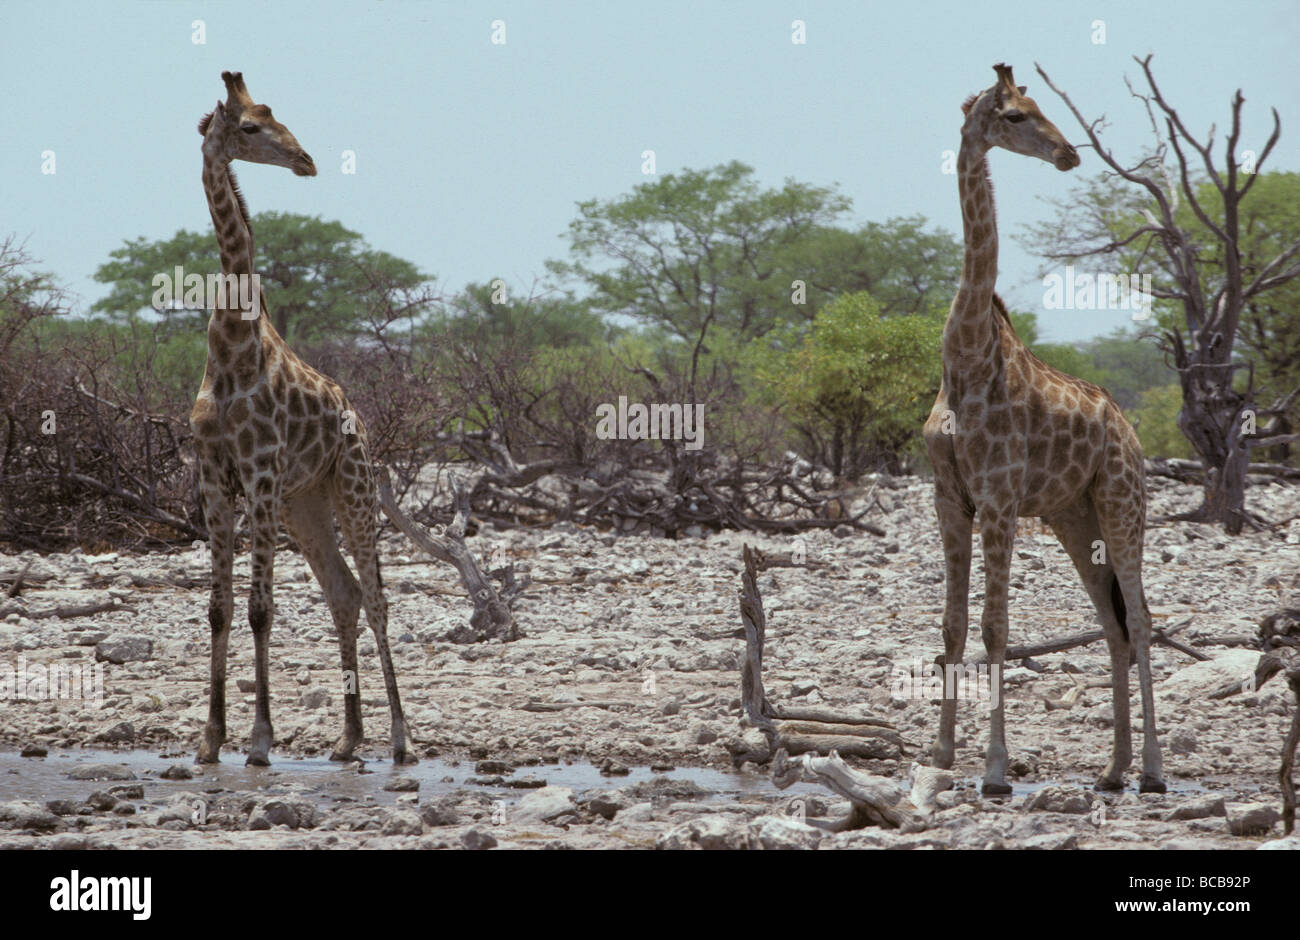 A Giraffe pair identically posed, head in profile, eyes and ears alert Stock Photo